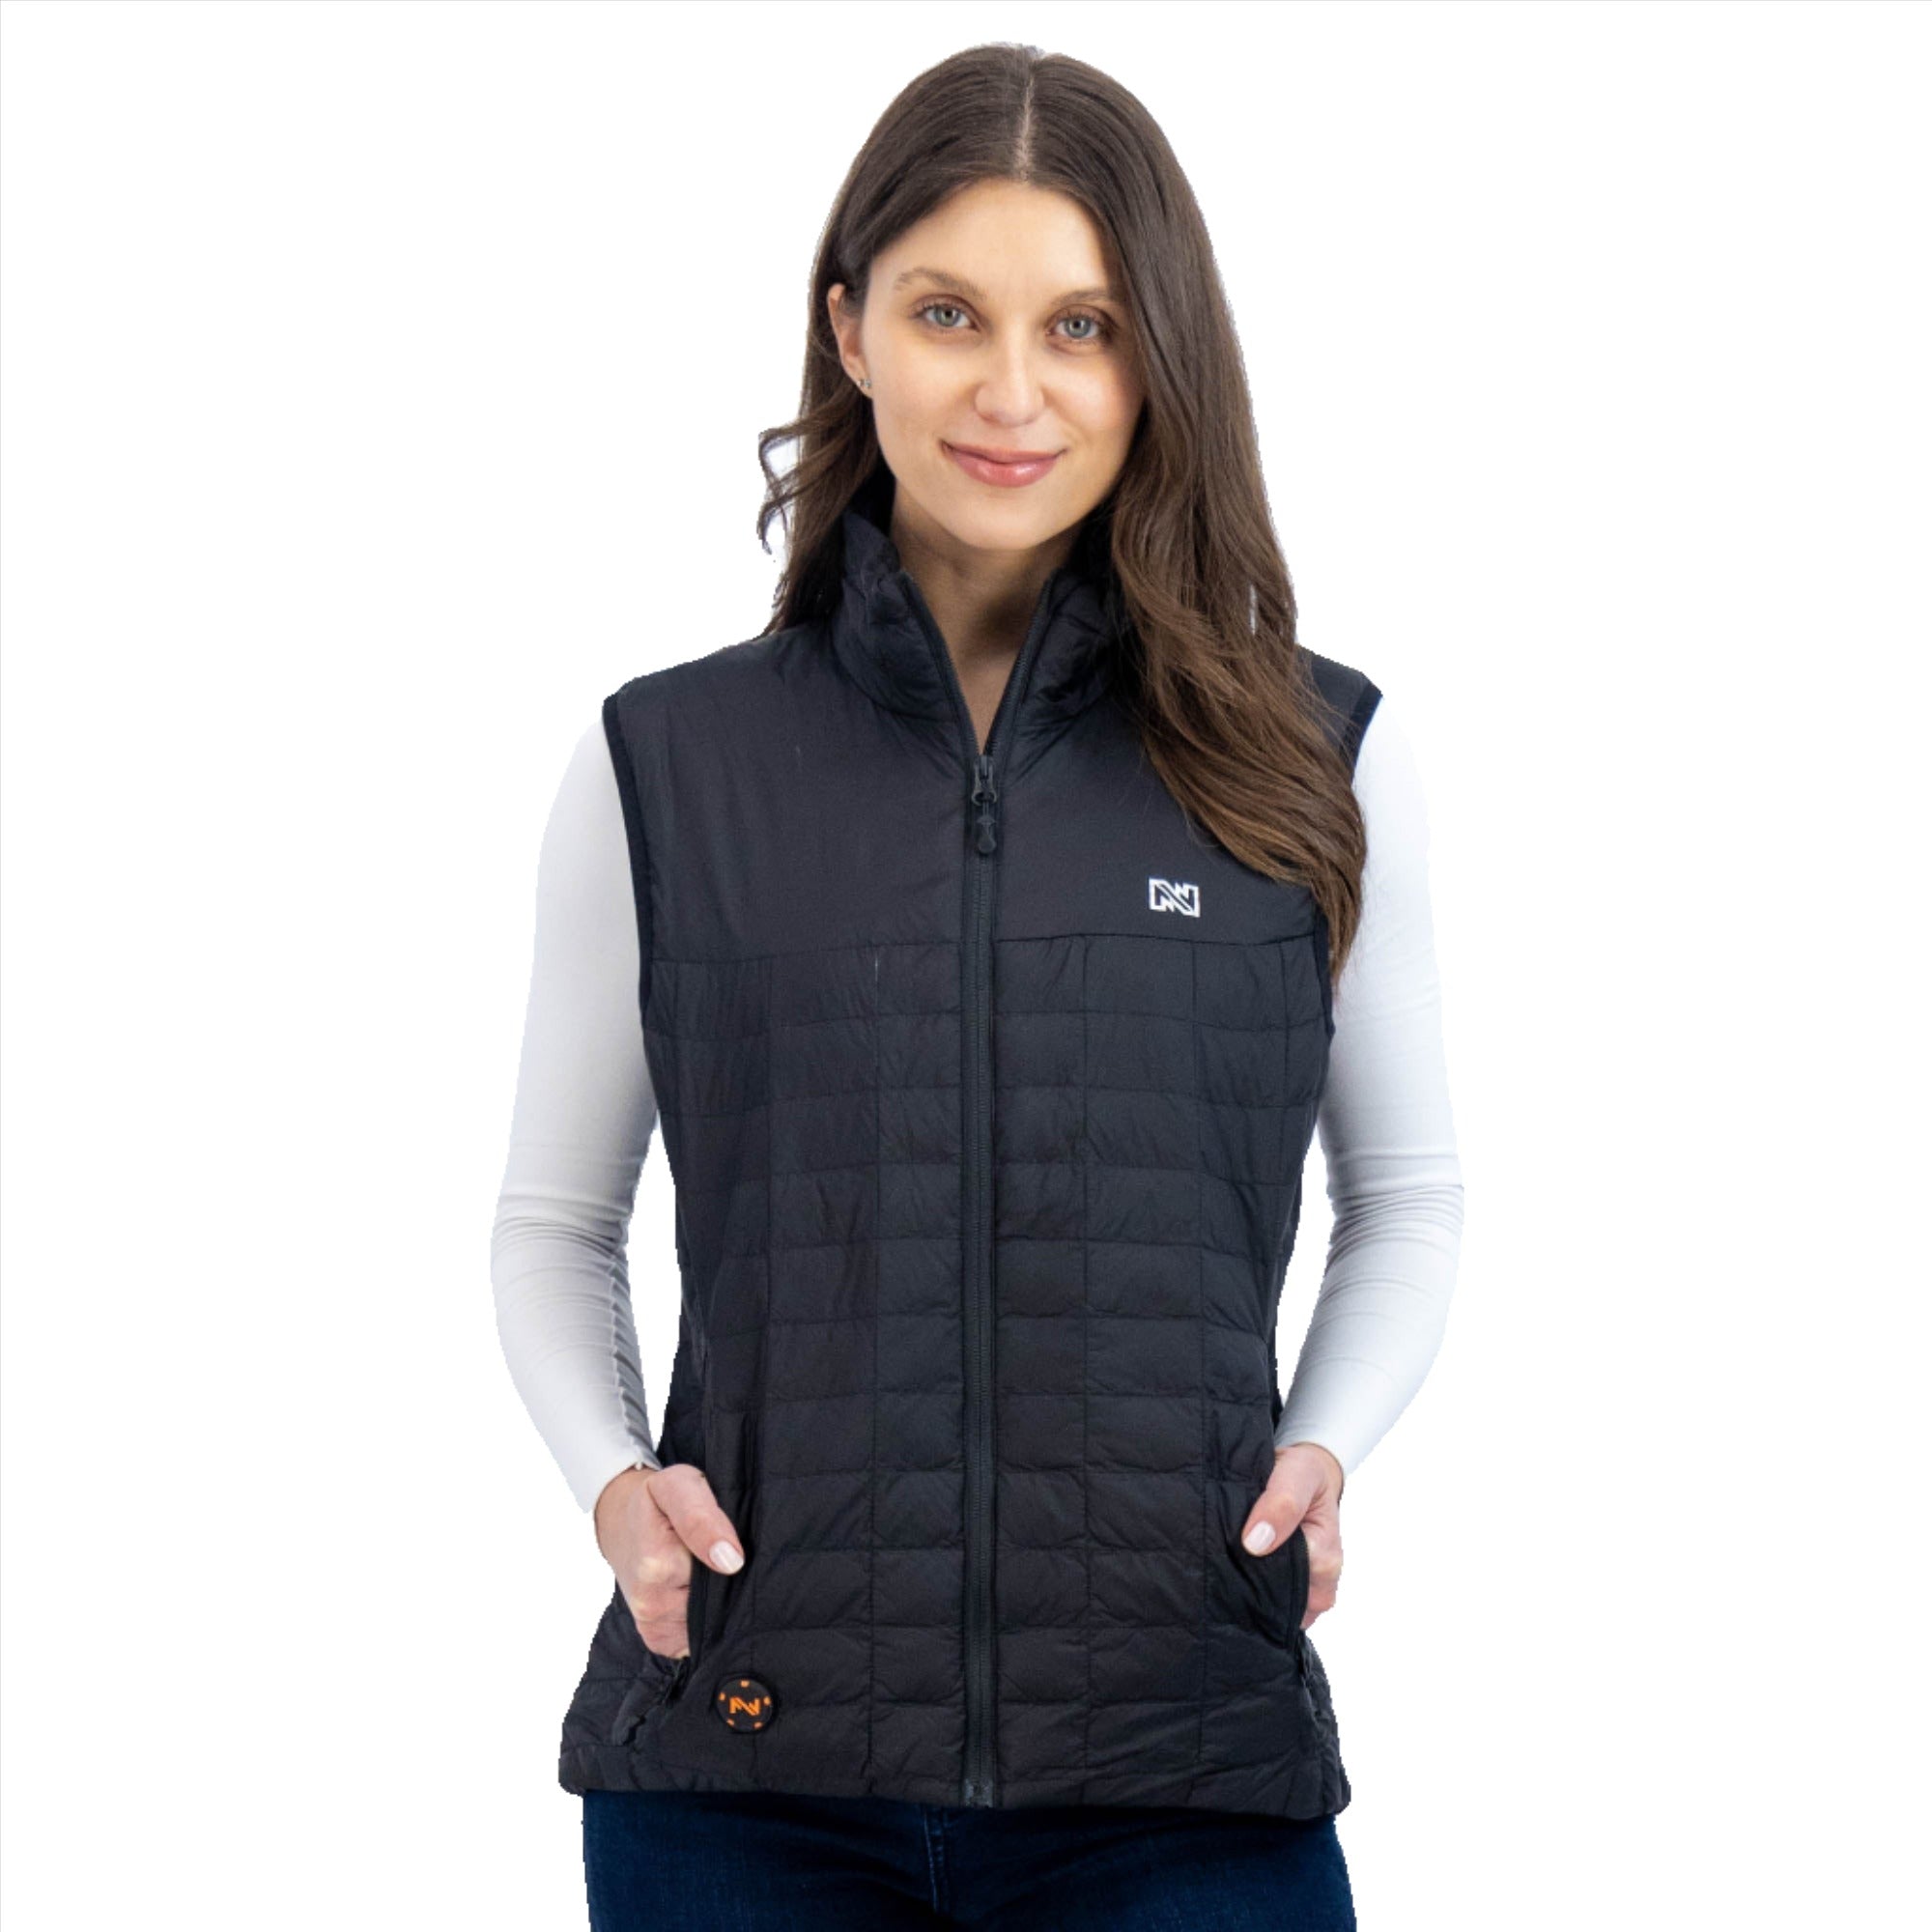 Women's Lightweight Quilted Heated Vest, Battery Heated